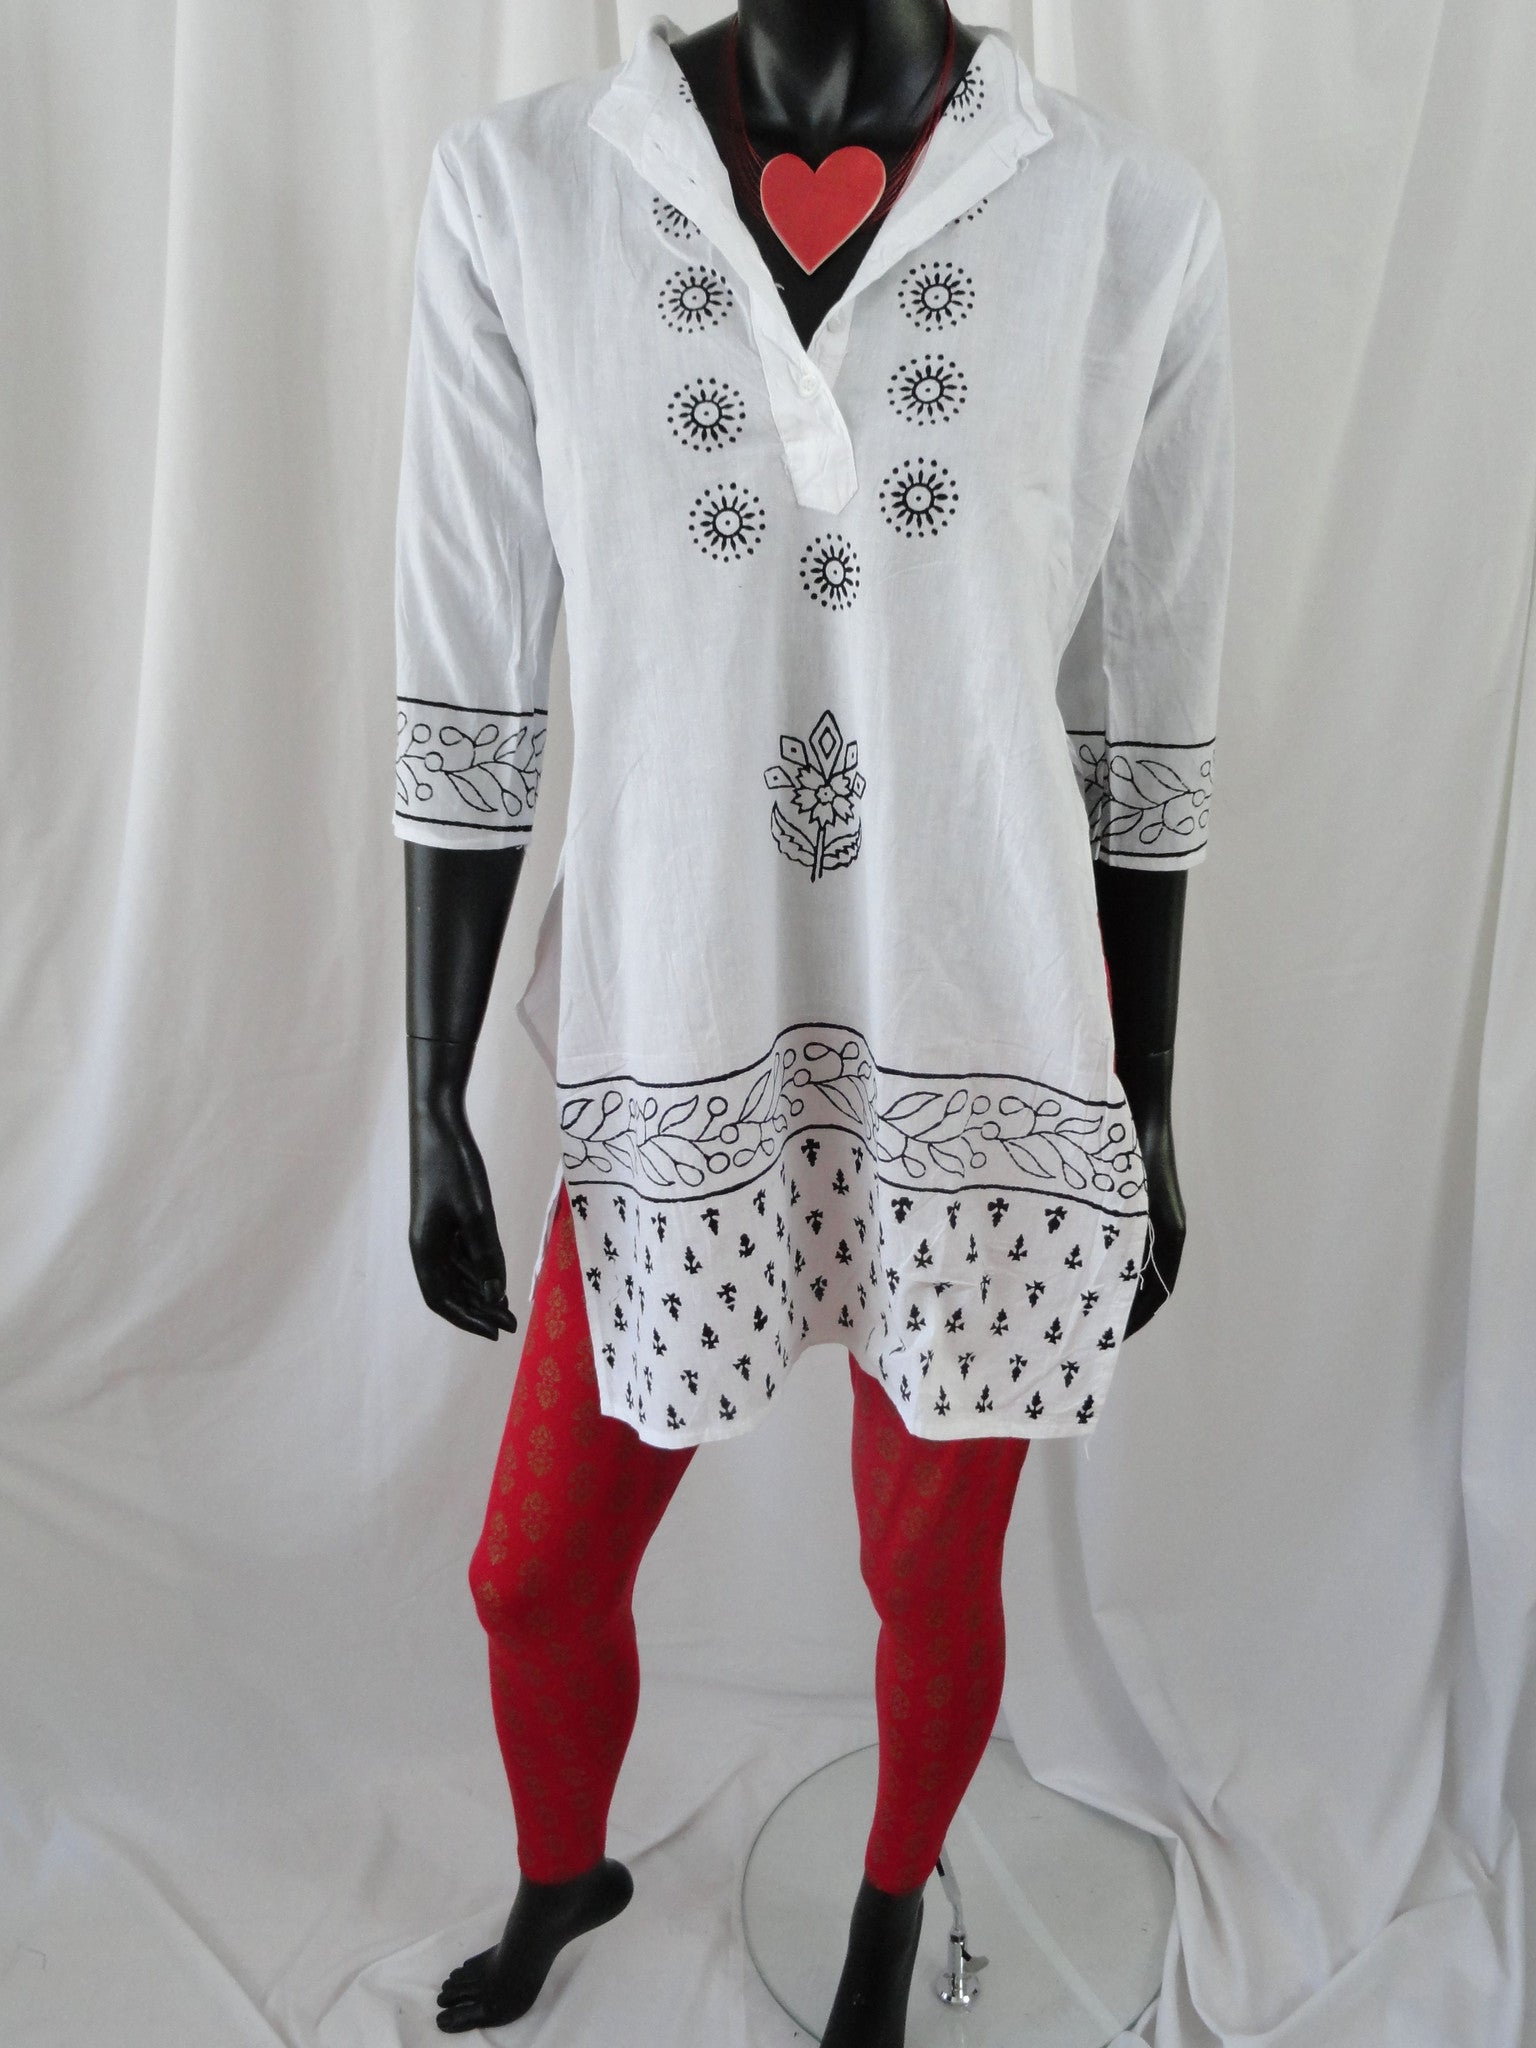 All white summer top from India. Soft Cotton short dress top with hand  block printed designs in black. Summer boho casual blouse or top.  ComfyCottons